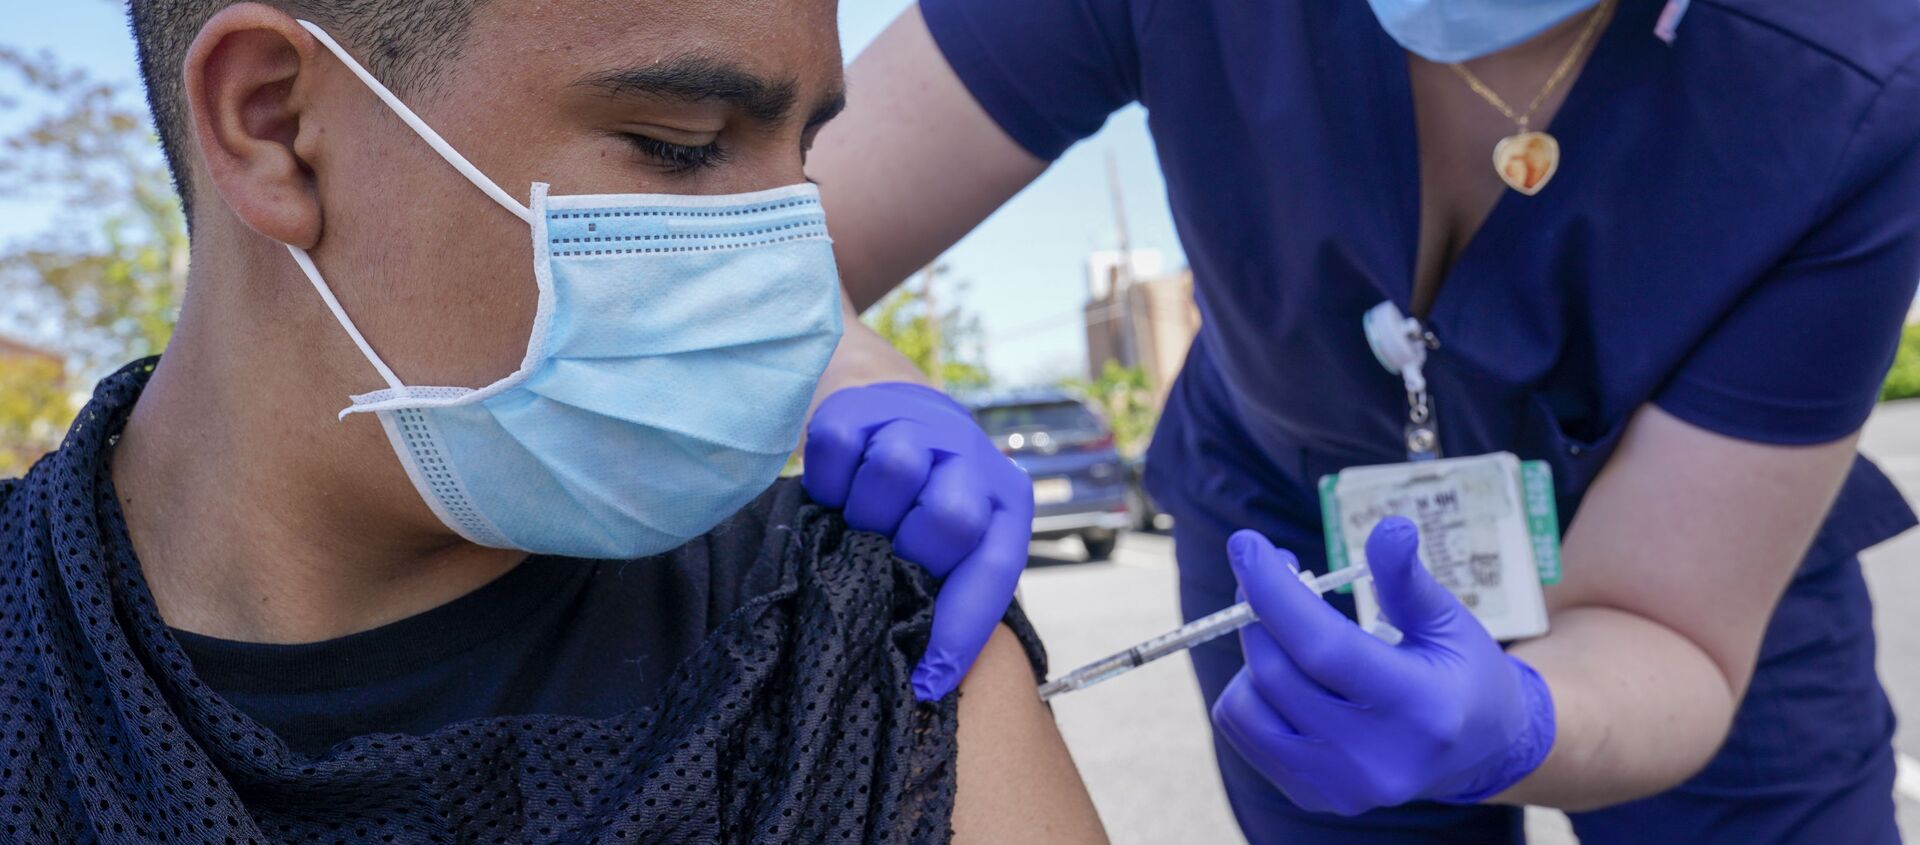 Justin Bishop, 13, watches as Registered Nurse Jennifer Reyes inoculates him with the first dose of the Pfizer COVID-19 vaccine at the Mount Sinai South Nassau Vaxmobile parked at the De La Salle School, Friday, May 14, 2021, in Freeport, N.Y.  - Sputnik International, 1920